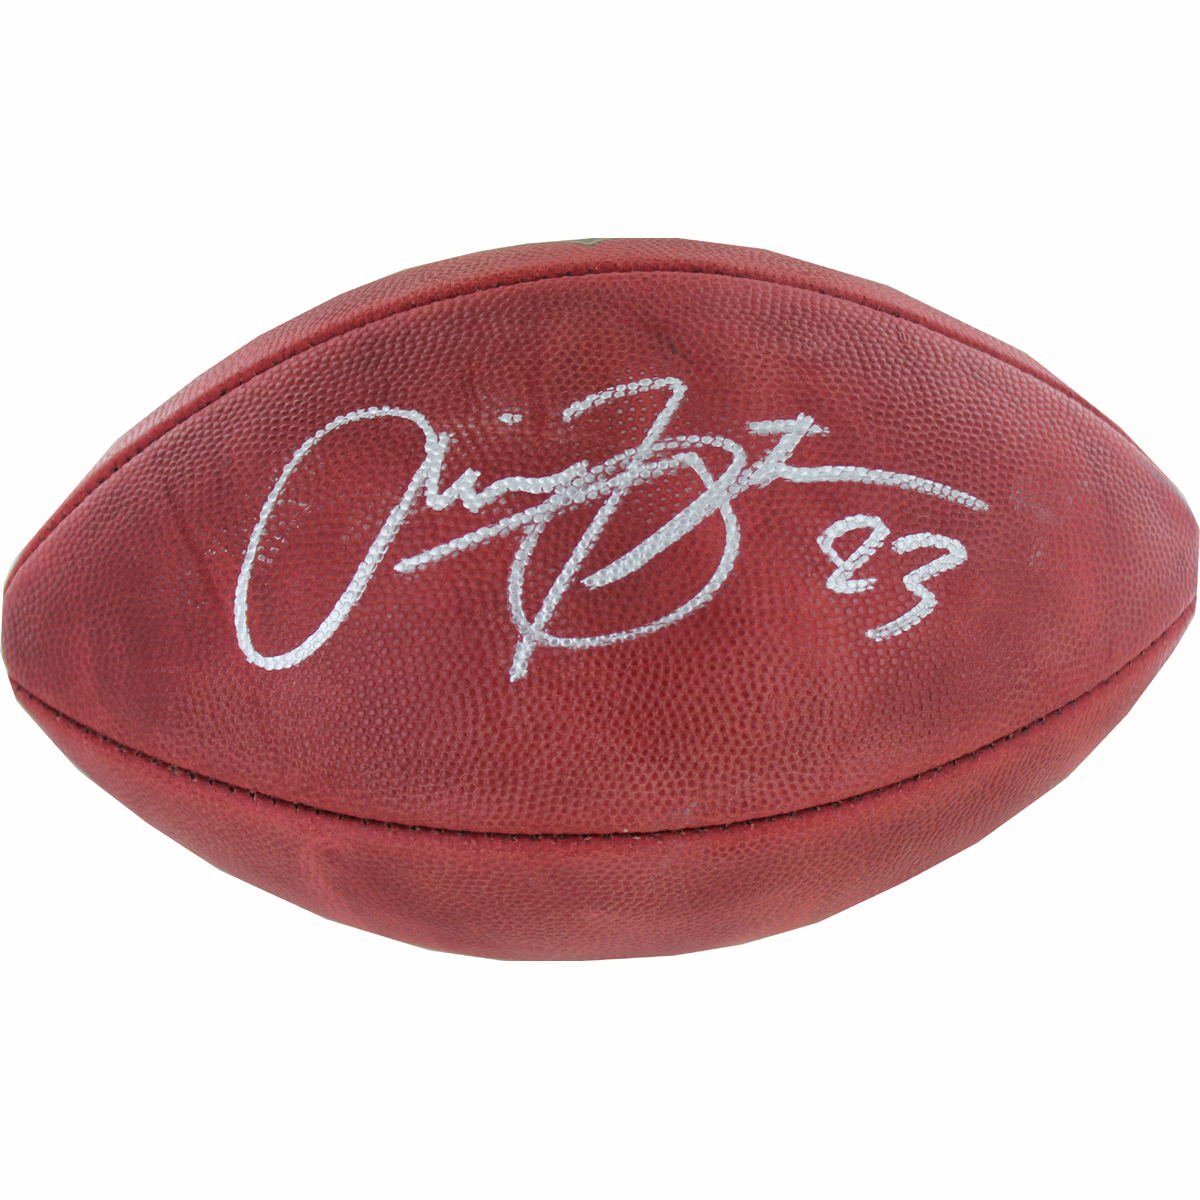 Arian Foster Autographed